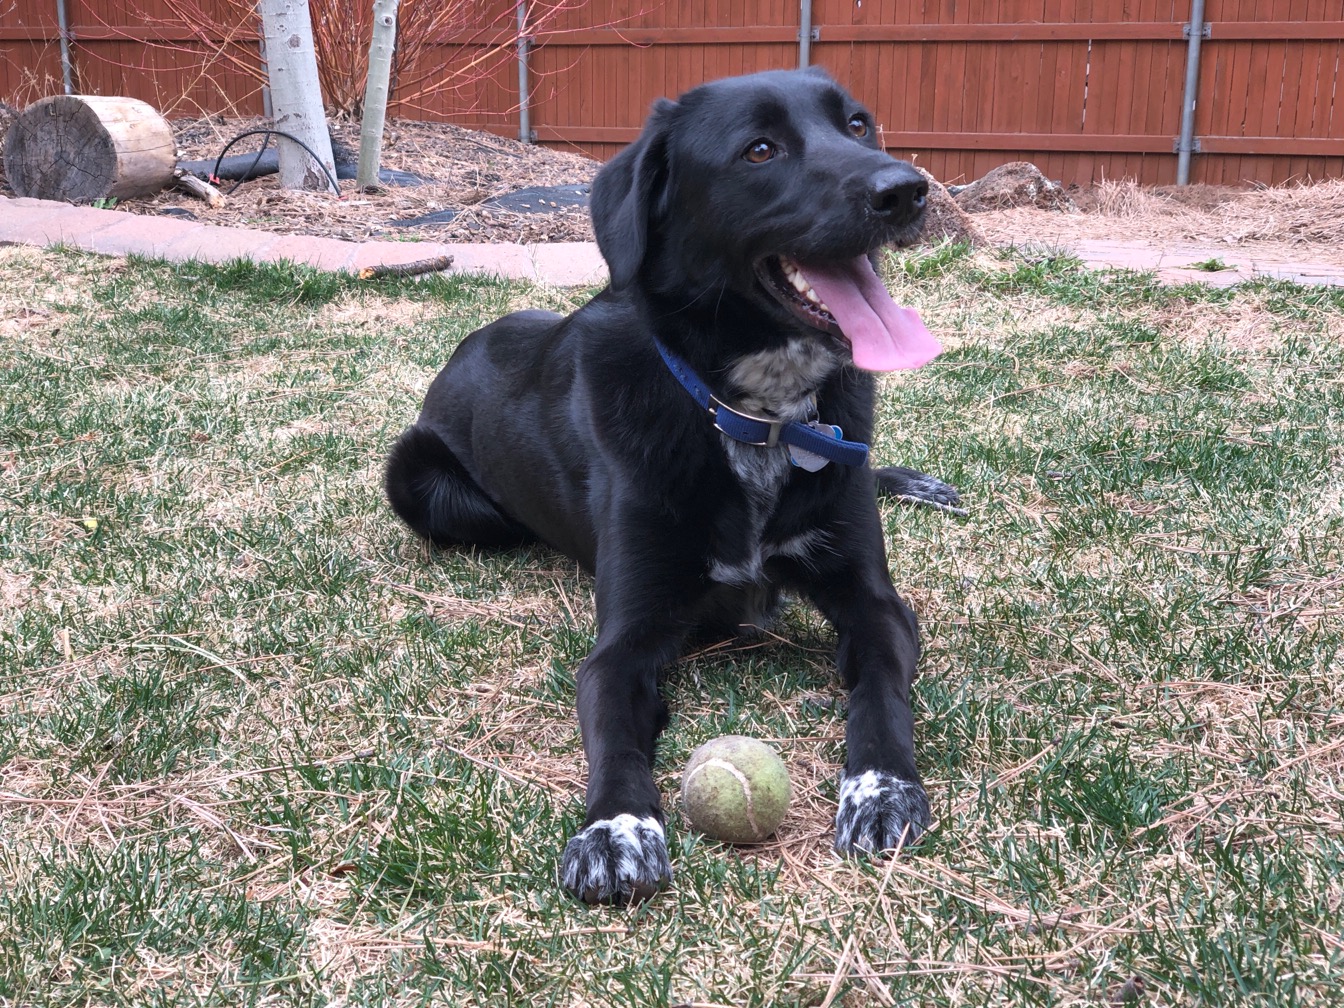 Black lab-like pup with tennis ball on the lawn.  